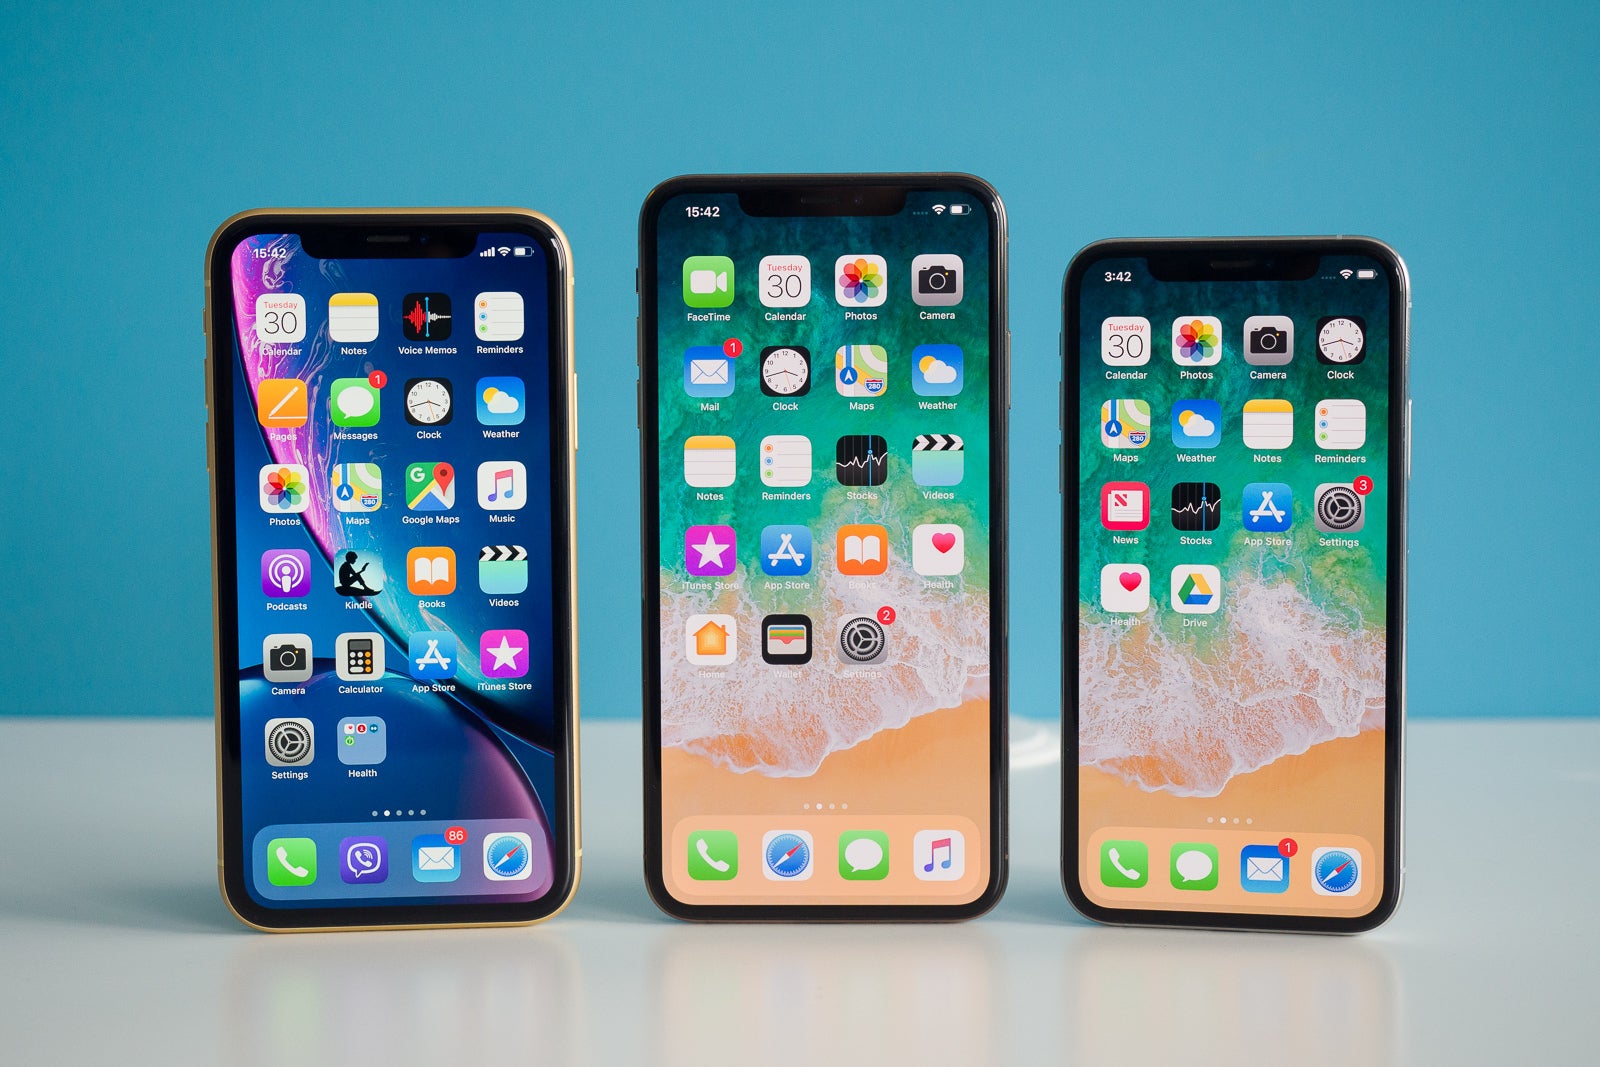 Apple is ditching the iPhone XS &amp; iPhone XR LCP technology almost entirely - 2019 iPhones to feature new antenna structure that improves indoor navigation